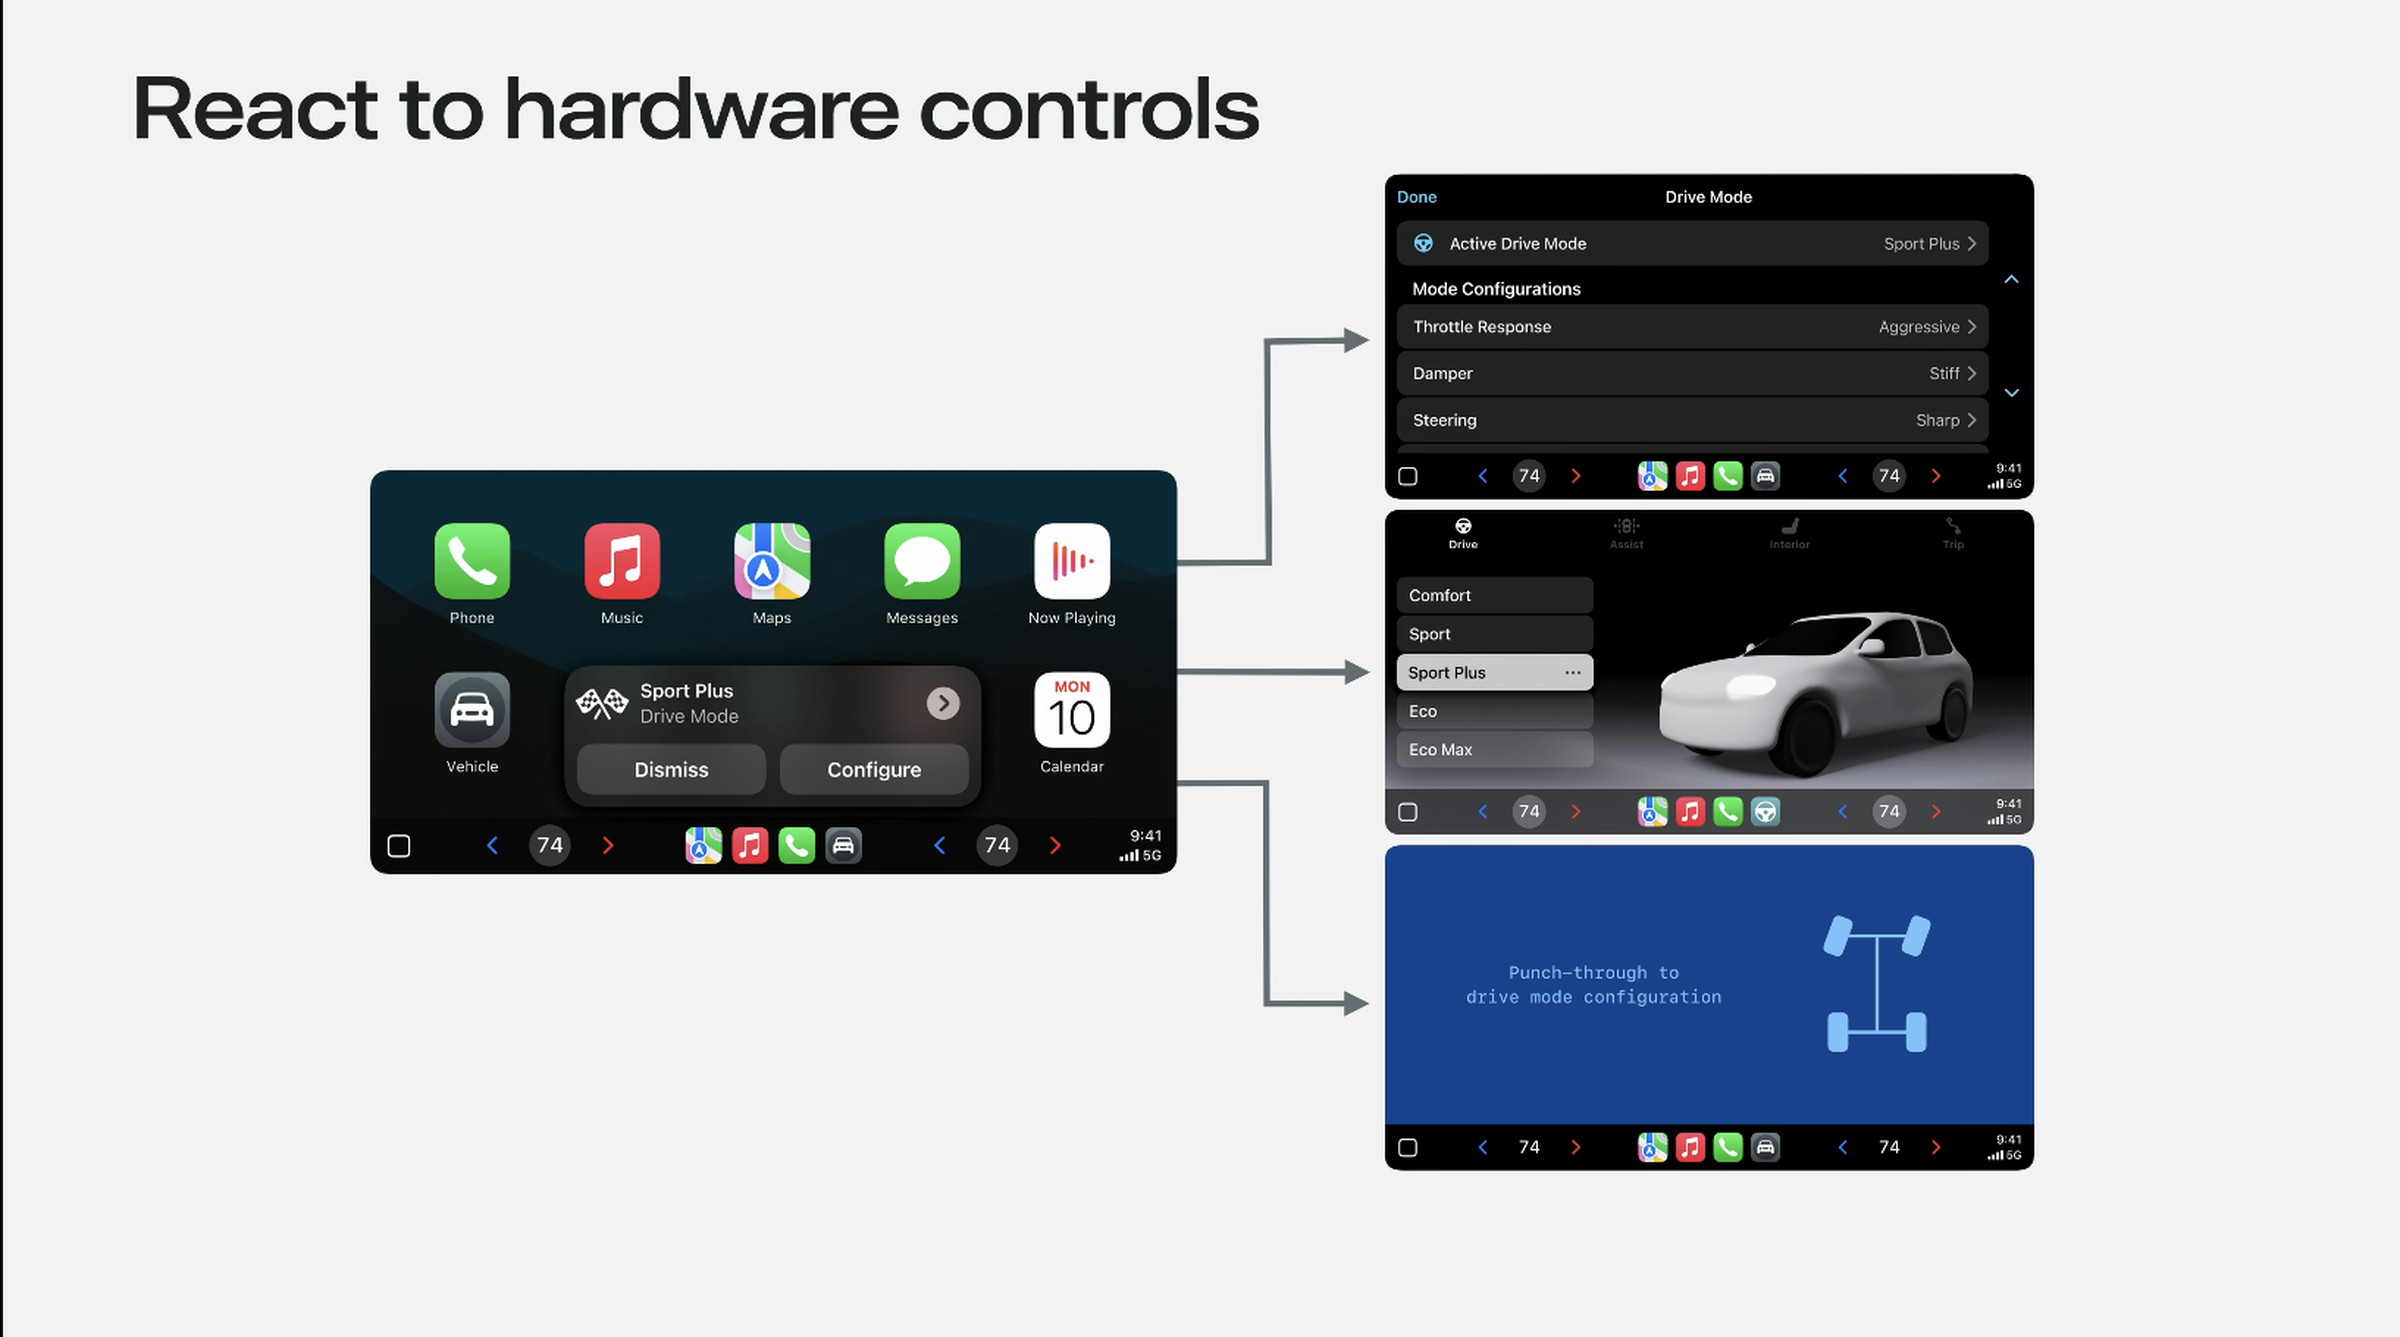 A screenshot showing drive mode controls in next-gen CarPlay sending users to either Apple-style controls or carmaker native controls.